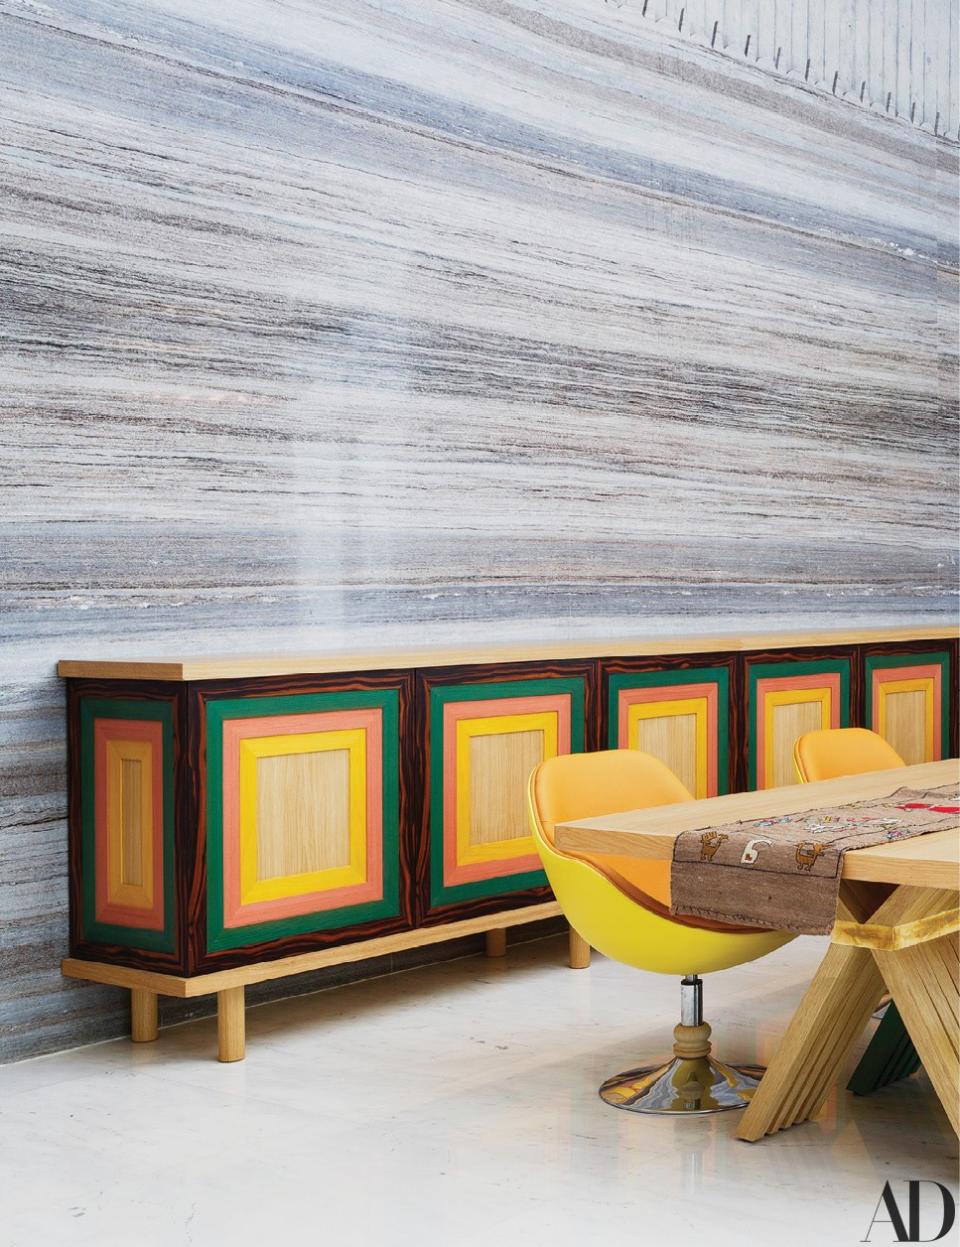 A colorful sideboard El Mays crafted for his new home.